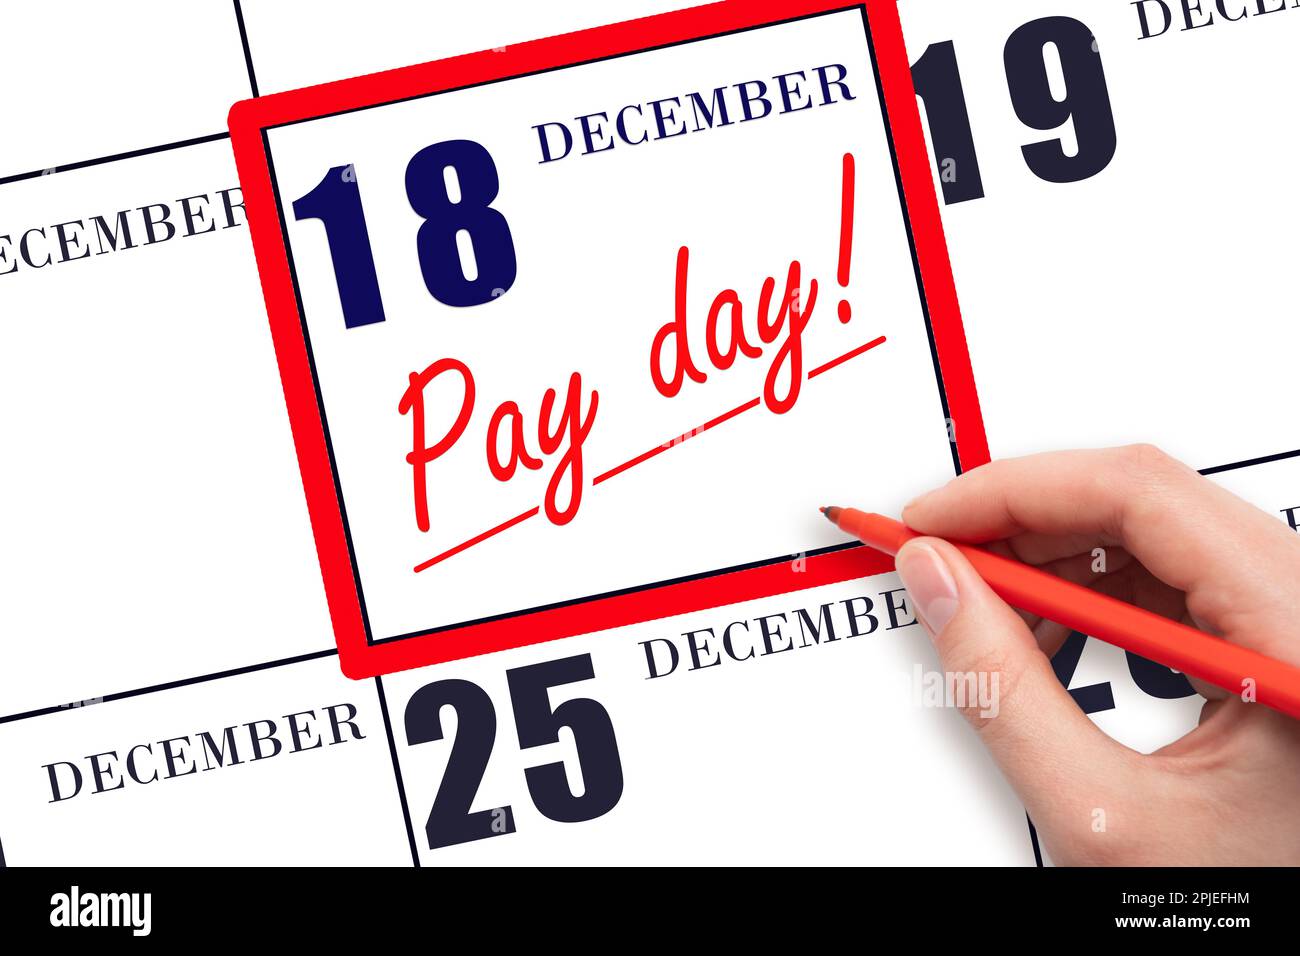 18th day of December. Hand writing text PAY DATE on calendar date December 18 and underline it. Payment due date. Reminder concept of payment. Winter Stock Photo